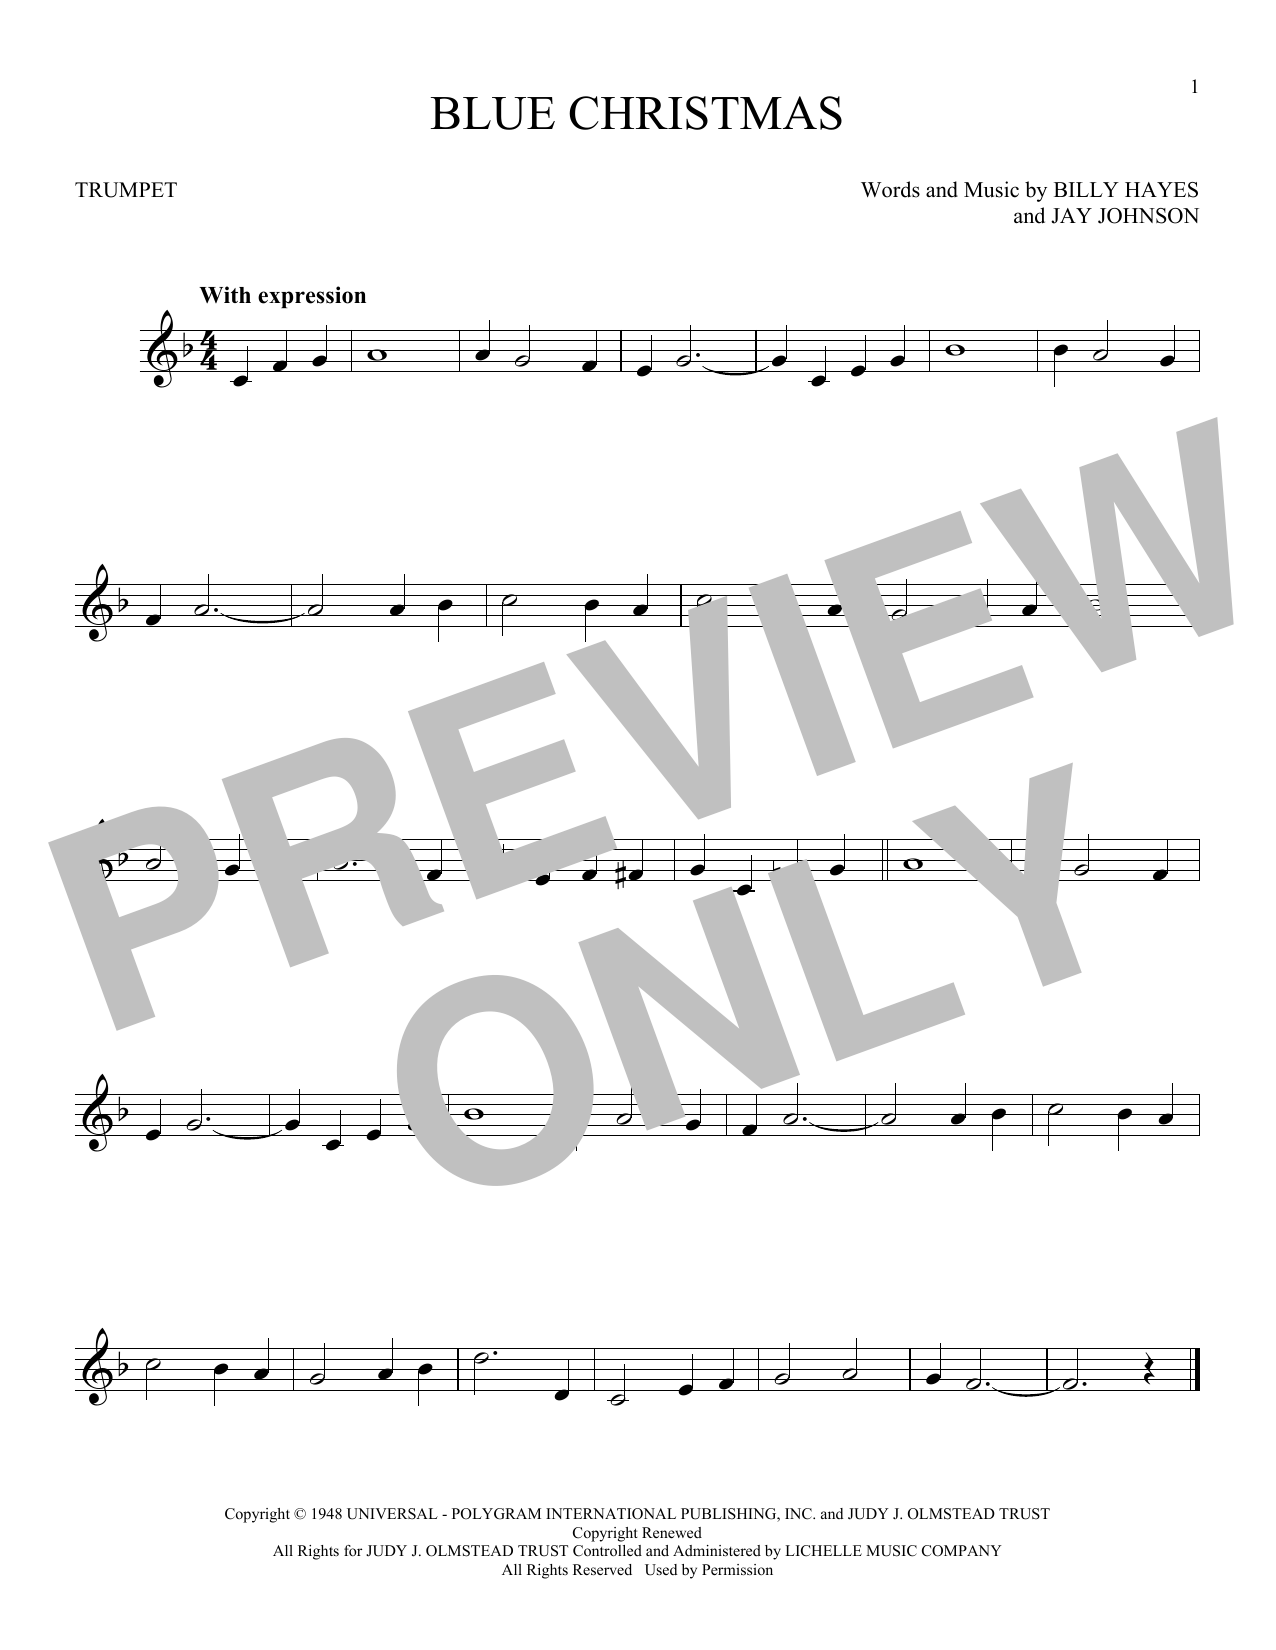 Elvis Presley Blue Christmas sheet music notes and chords. Download Printable PDF.